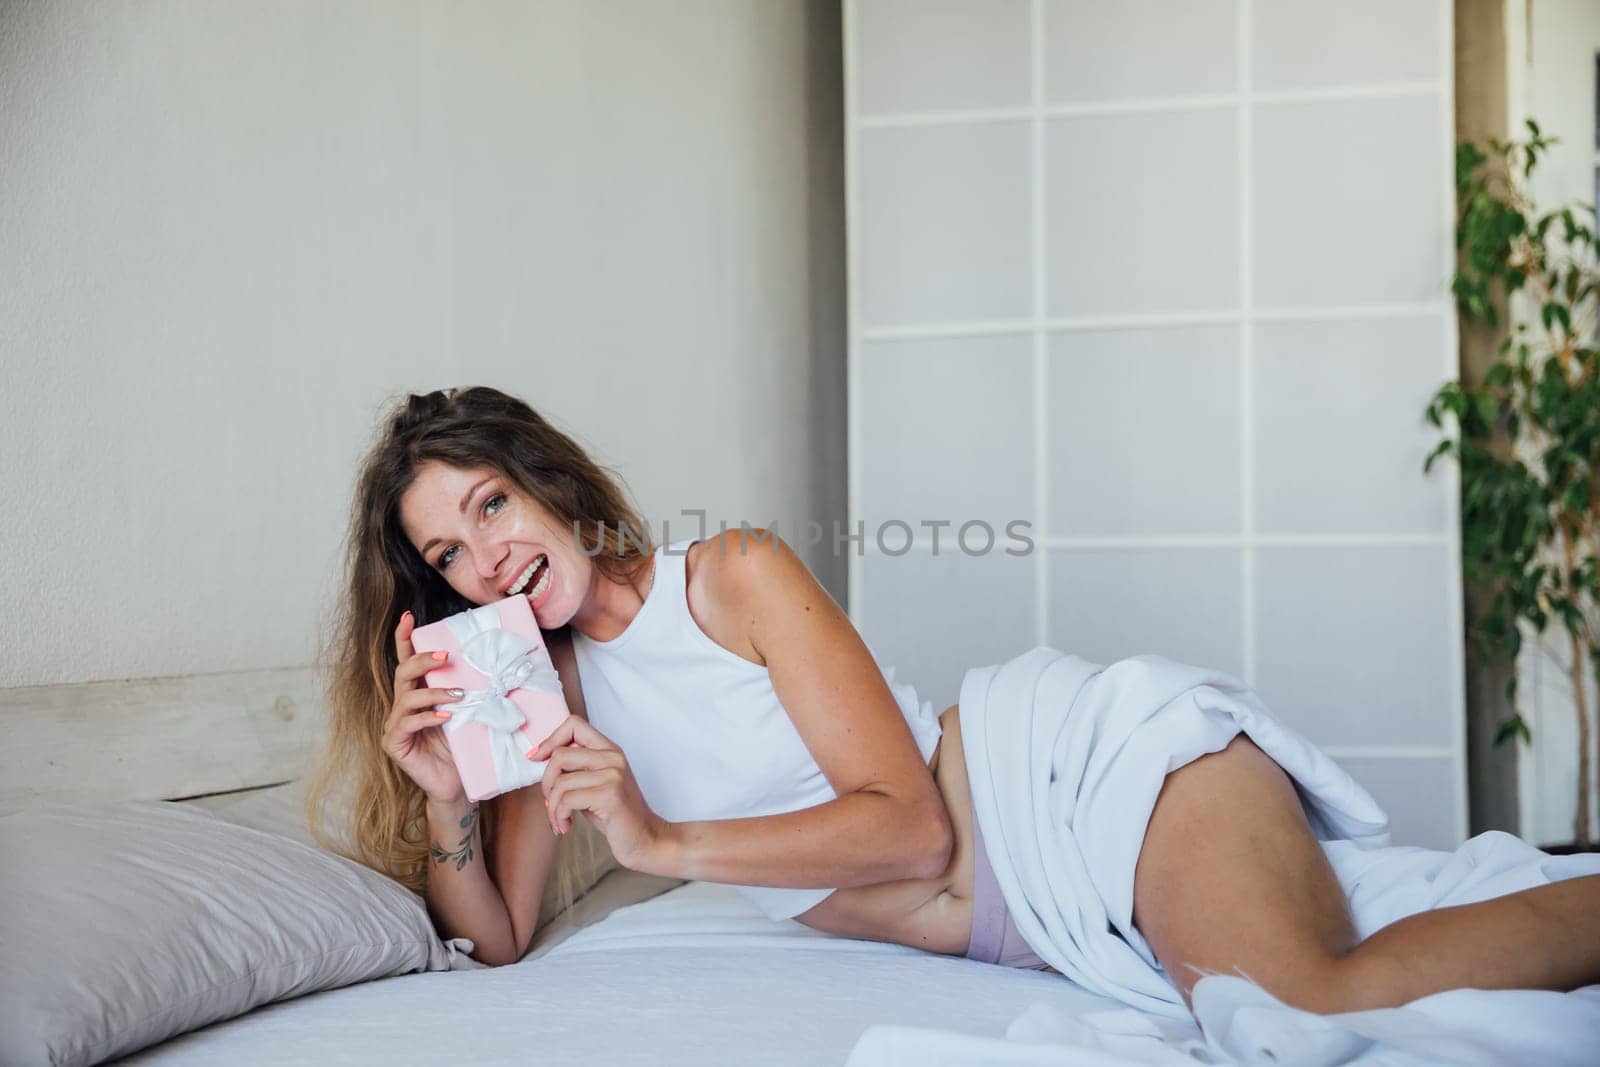 Smiling woman with gift box lying in bed and looking at camera